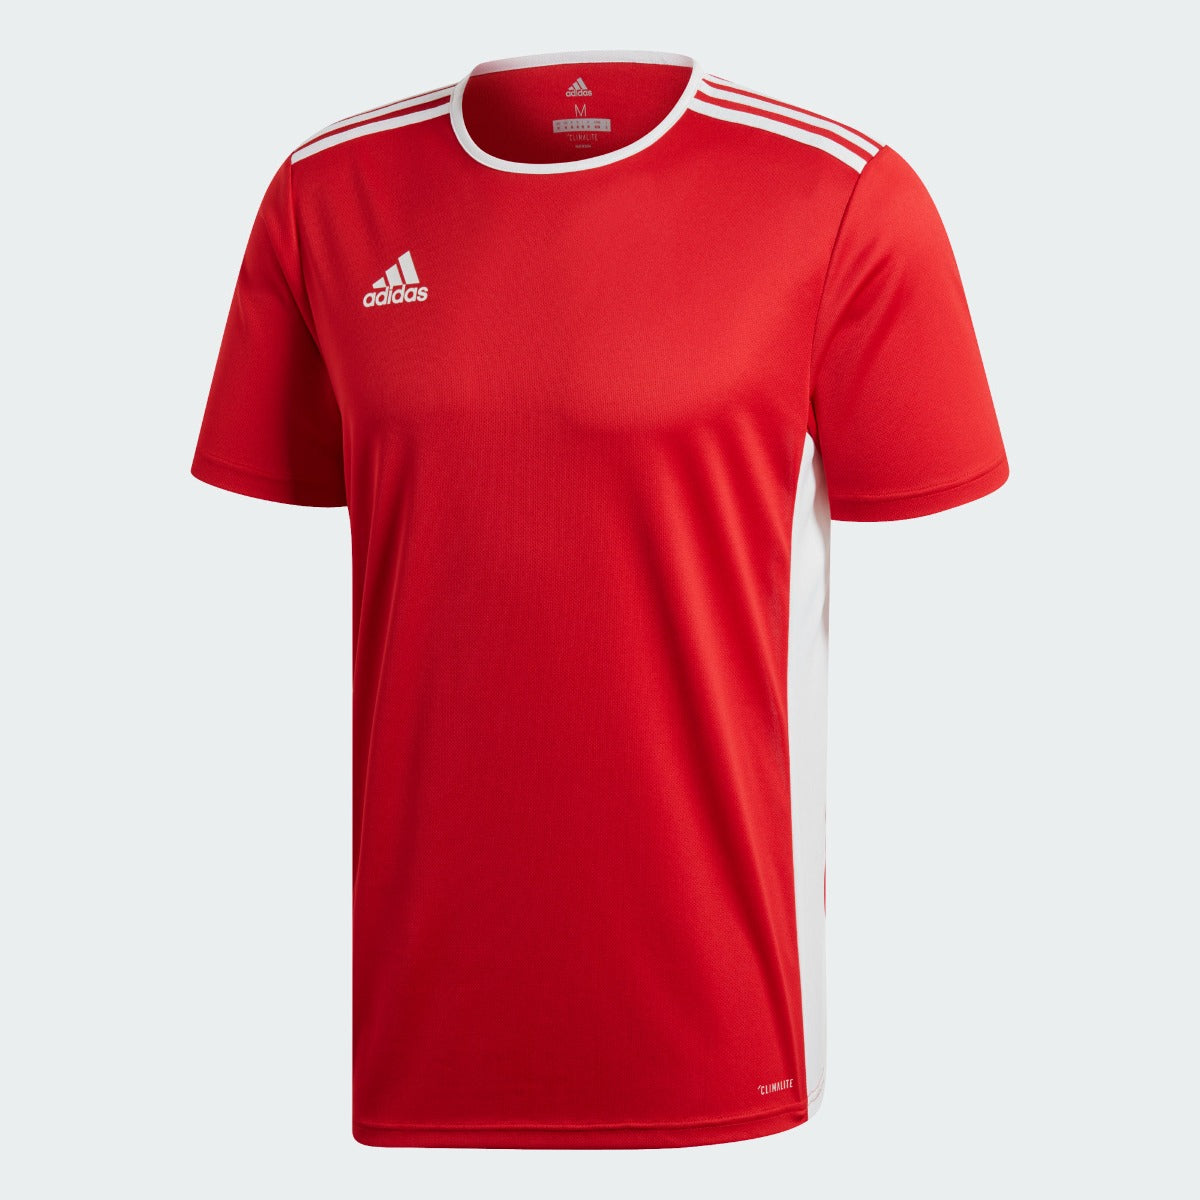 Adidas Entrada 18 Jersey - Red-White (Front)